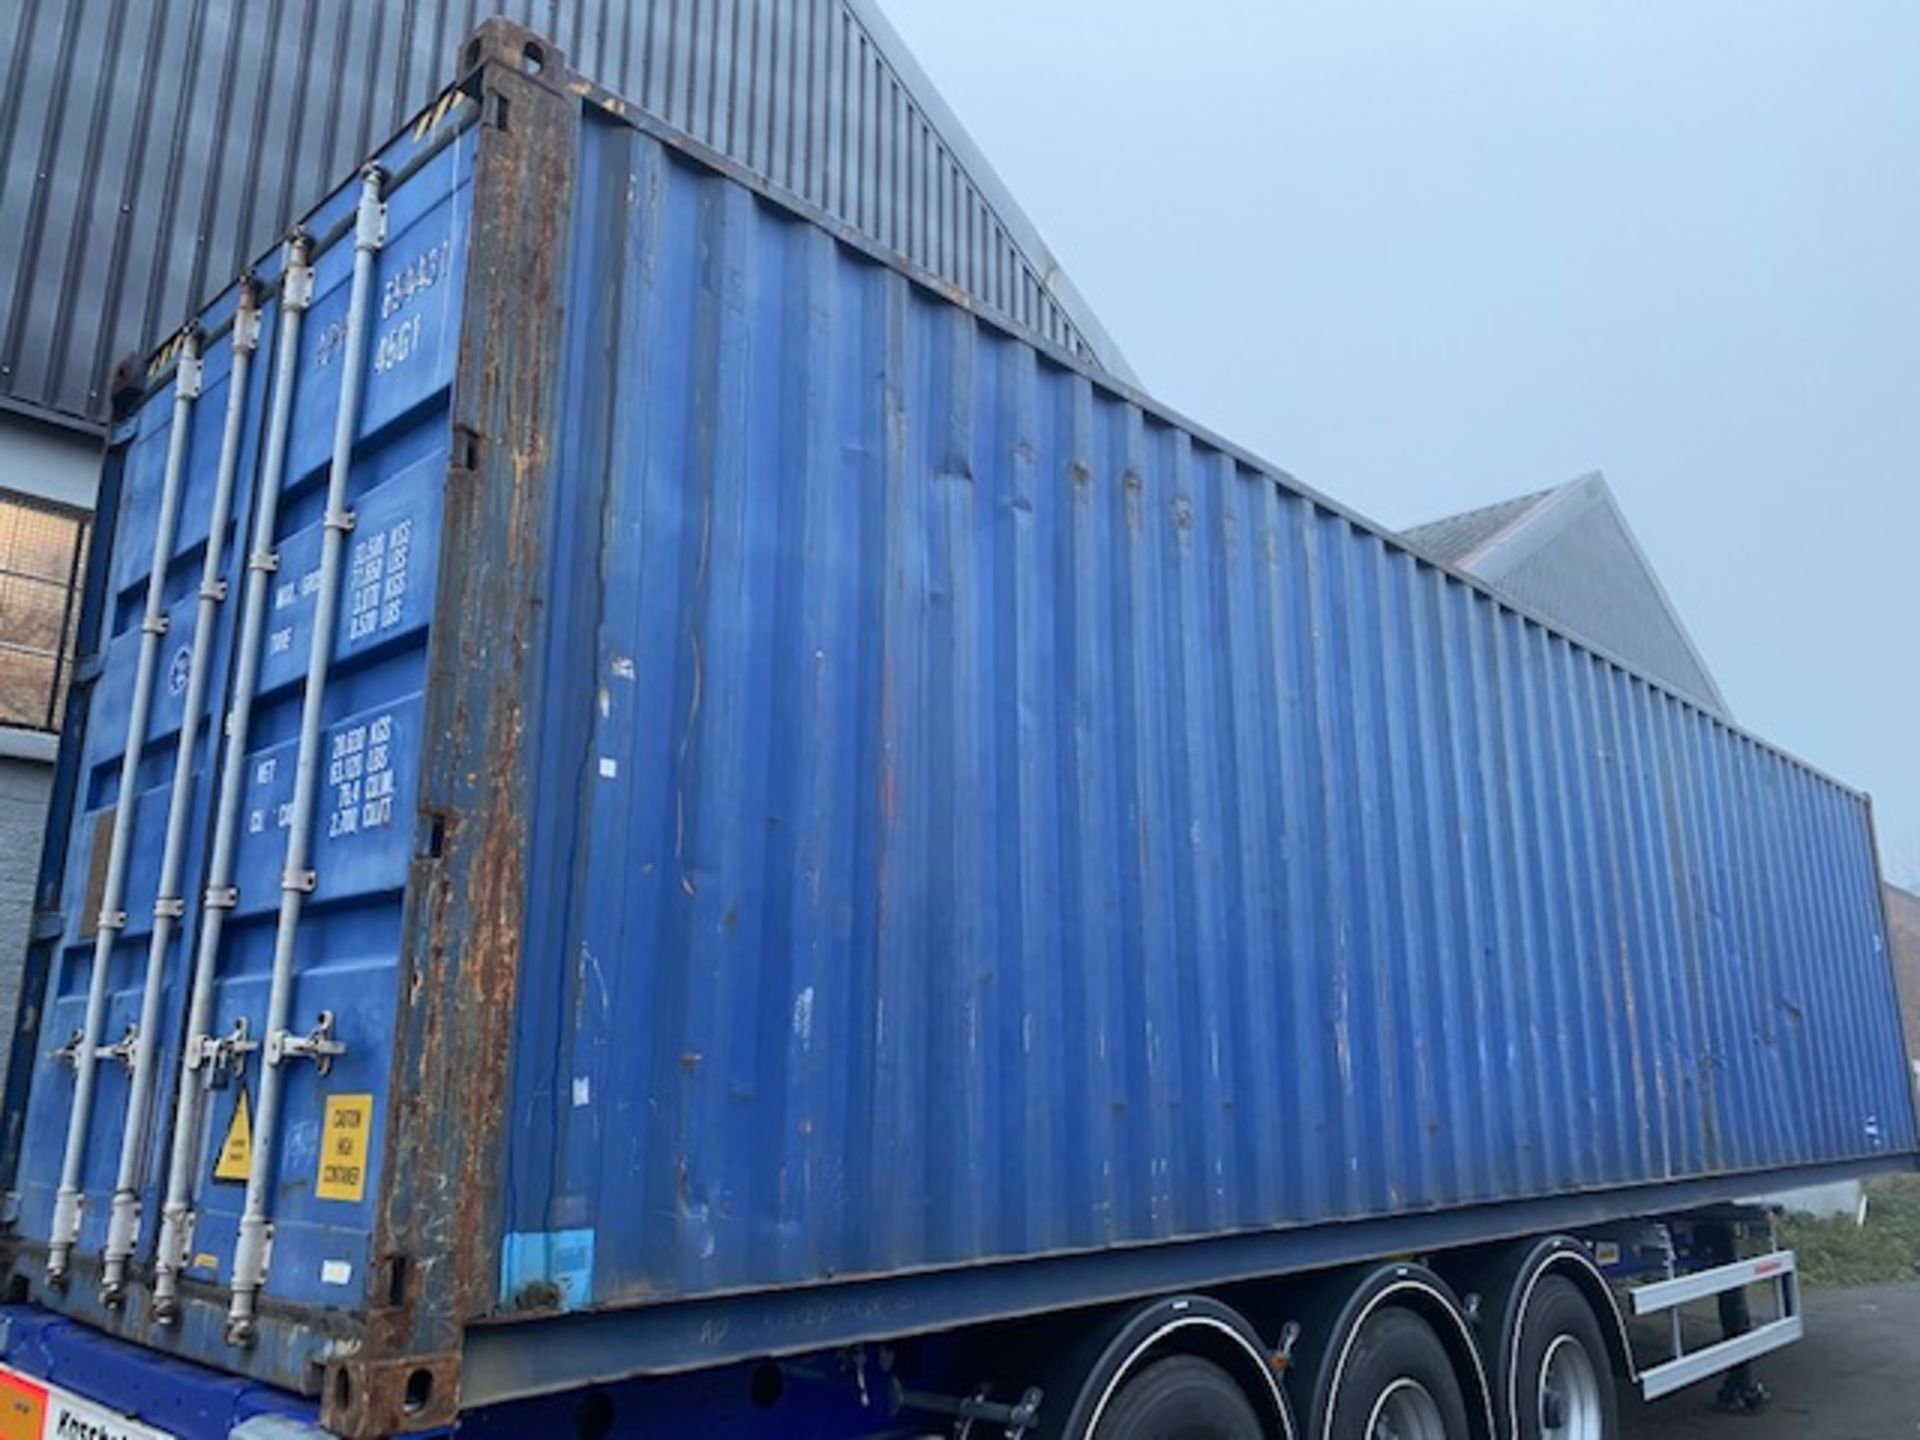 + VAT Blue 40ft HQ Shipping Container - Appears To Be Wind And Watertight - Trailer Not Included